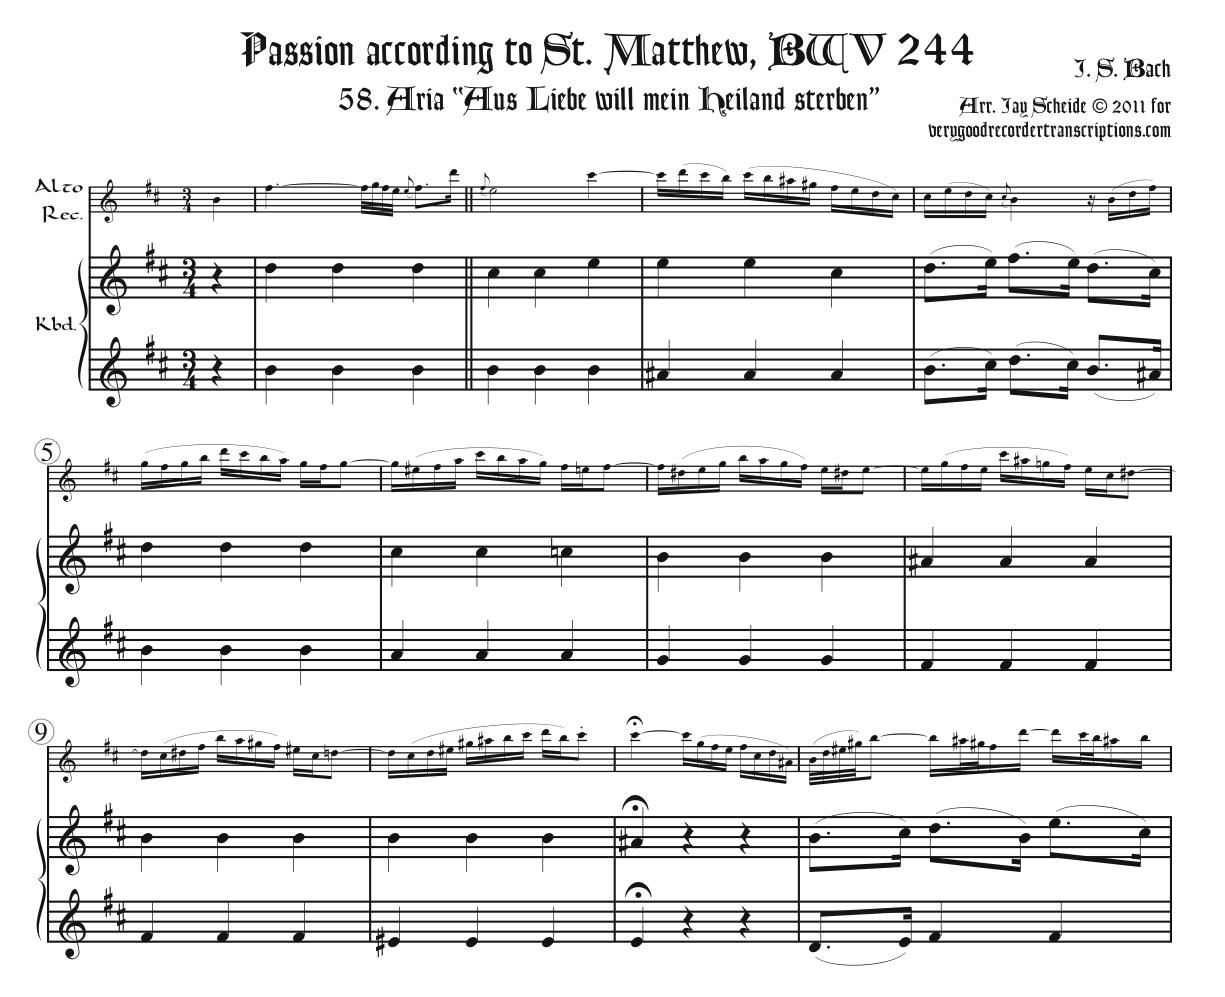 Aria, “Aus Liebe,” from the *St. Matthew Passion*, BWV 244